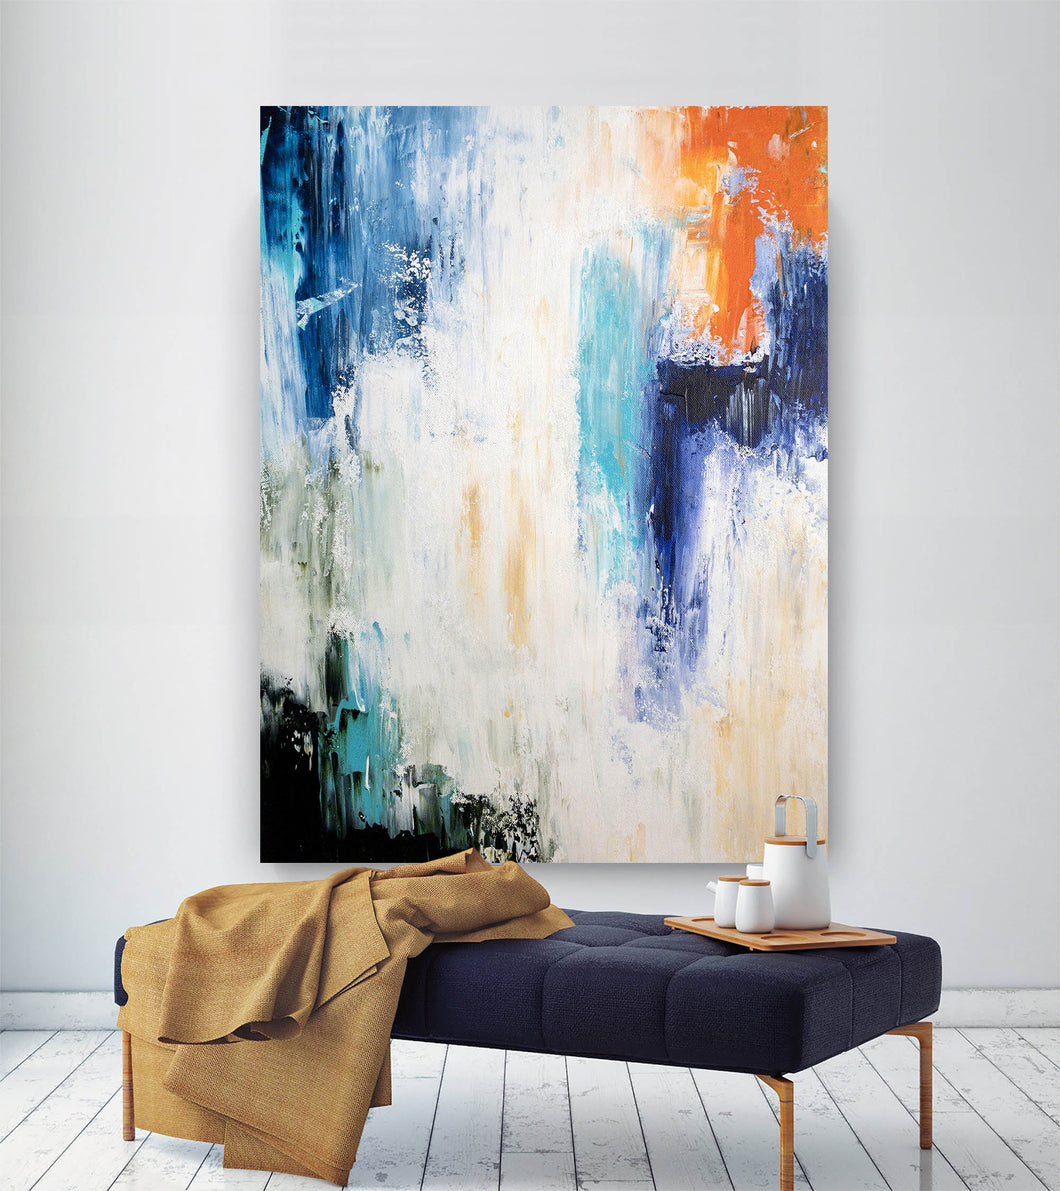 Blue White Orange Abstract Painting Large Living Room Art Fp057